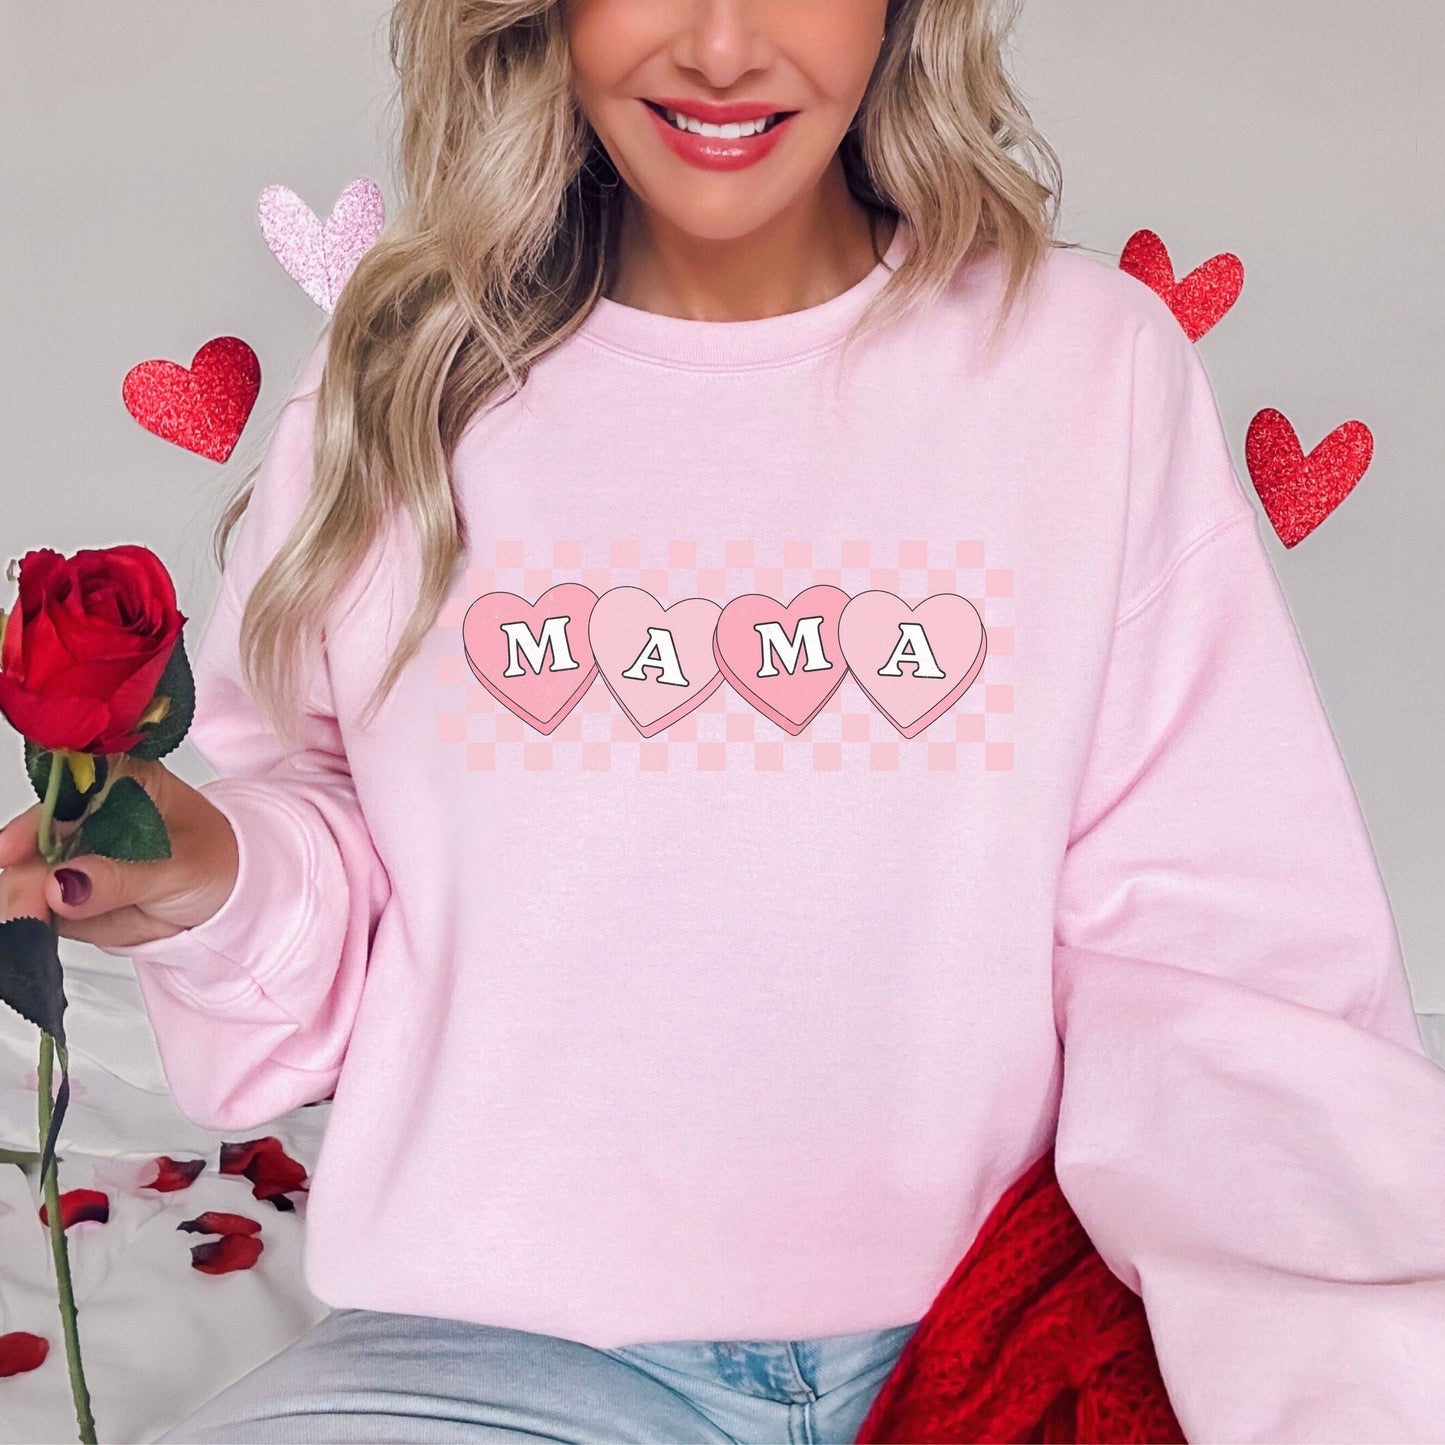 mama valentines day hearts candy heart pink checkered print on white sweatshirt gift